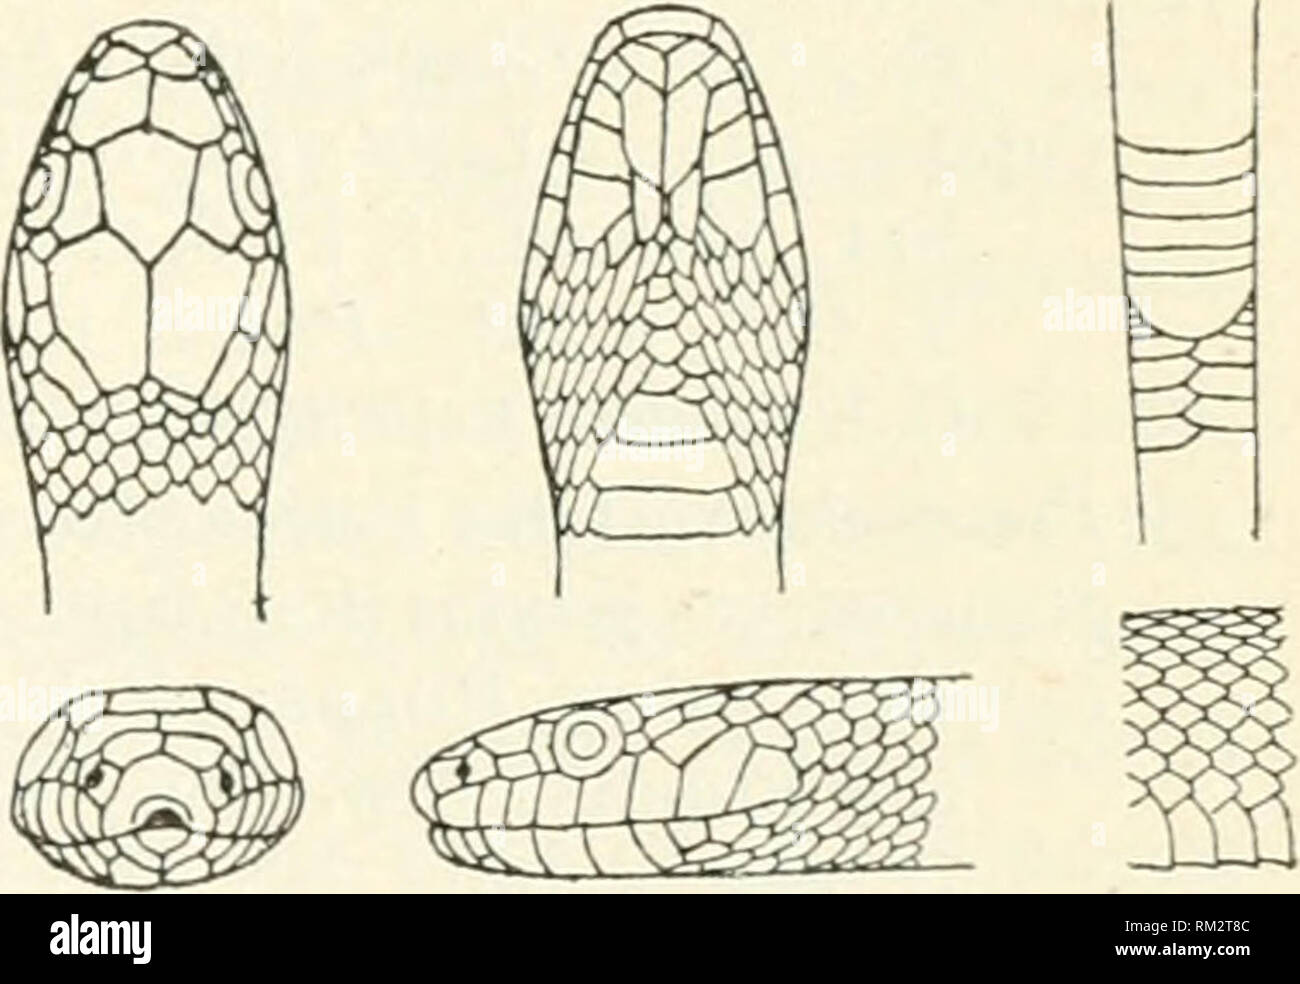 . Annual report of the Board of Regents of the Smithsonian Institution. Smithsonian Institution; Smithsonian Institution. Archives; Discoveries in science. CROCODILIANS, LIZAKDB, AND SNAKES. 909 OPHIBOLUS MULTISTRATUS Kennicott.. Ophibolus mitltktratus Coi&gt;E, Check-list N. Amer. Batr. Kept., 1875, p. 37. Lampropeltia multistrata Kennicott, Proc. Acad. Nat. Sci. Phila., 18B0, p. 328. Dorsal scales in tweuty-three rows. Form similar to that of (hrt'ohi gentilis, but the head and eye larger. Color above browuish red, with thirty-one pairs of narrow black half rings inclosing white spaces from  Stock Photo